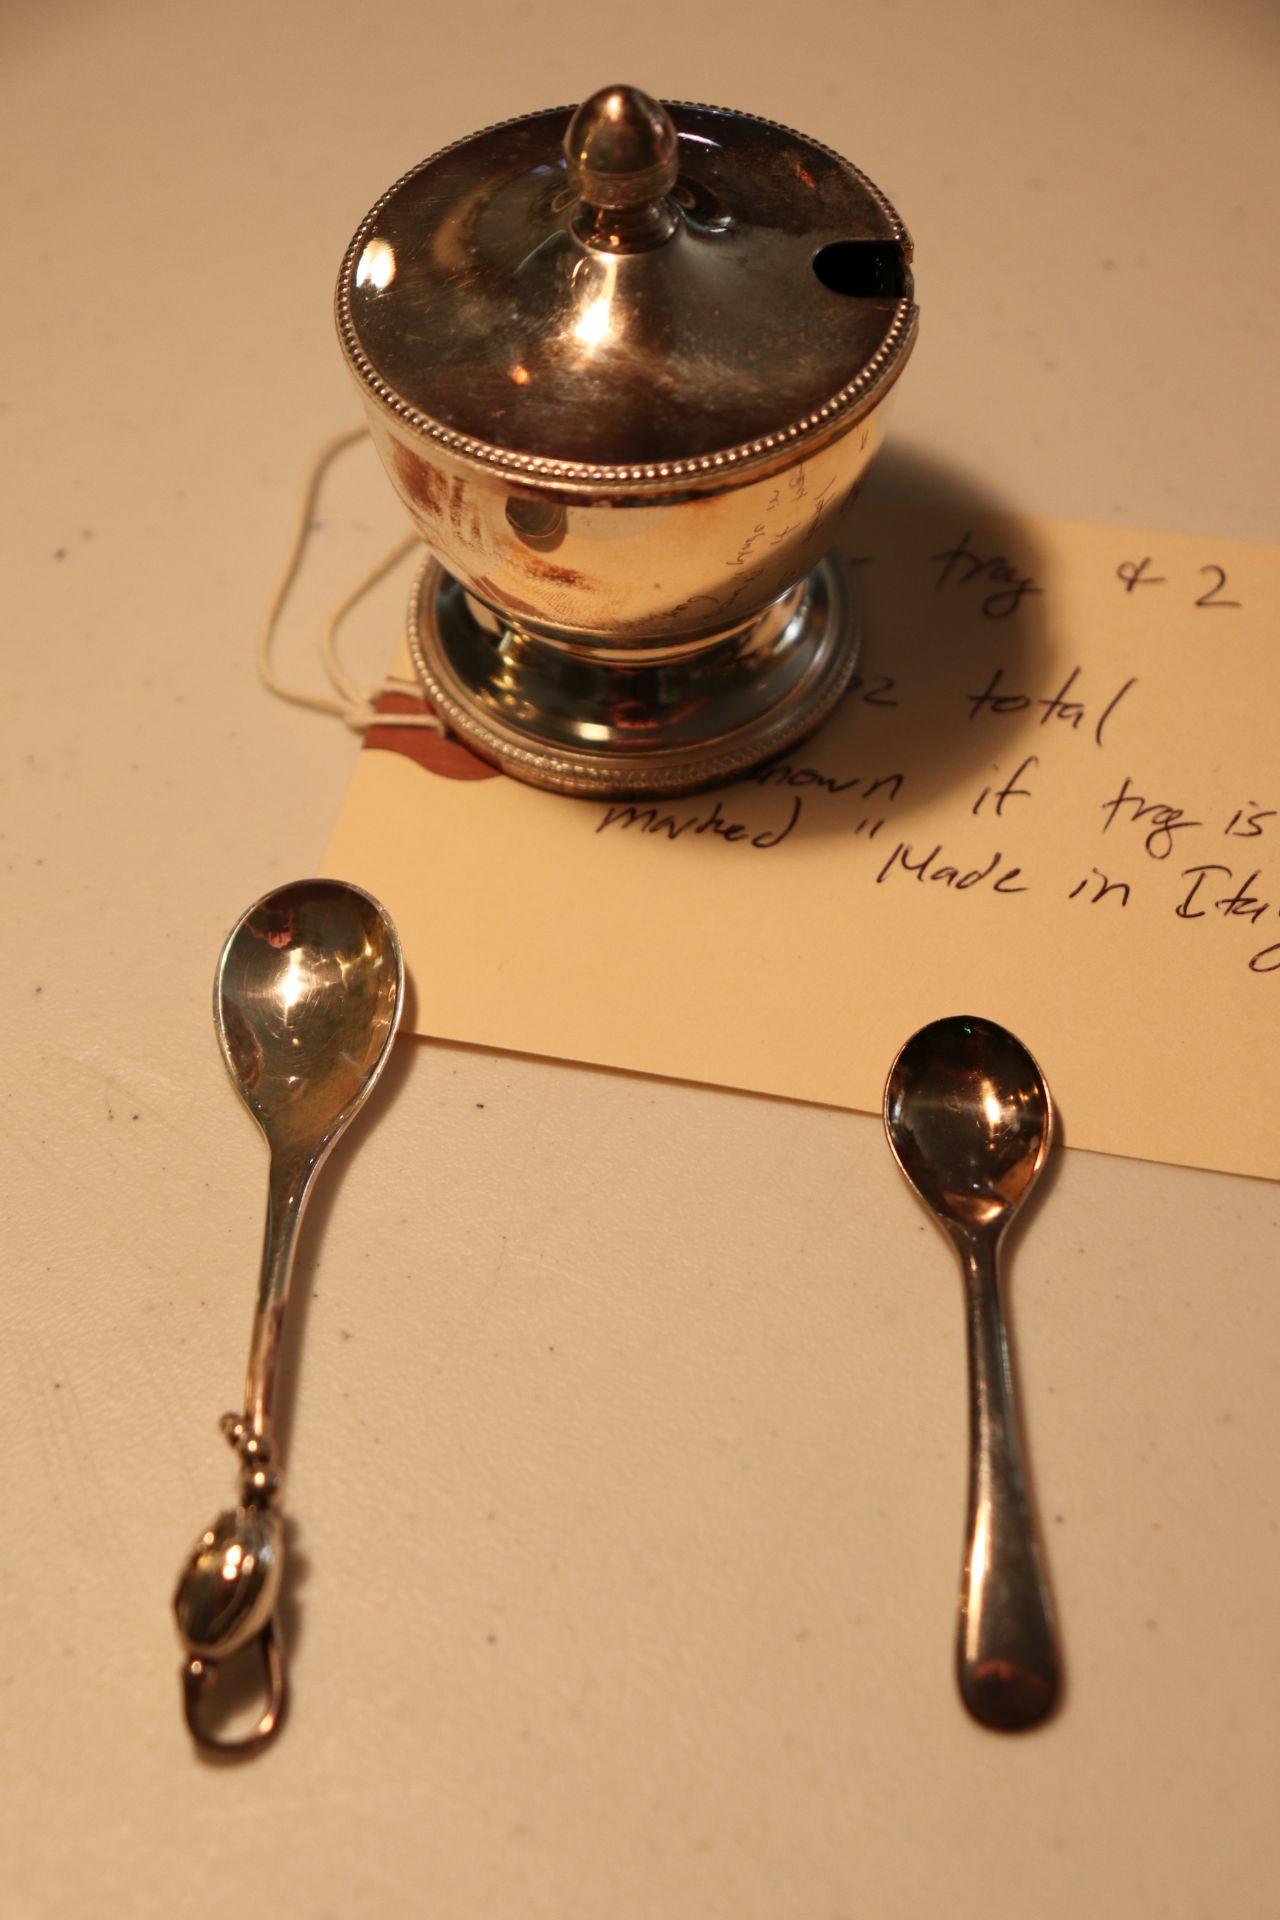 Sugar tray and 2 sterling spoons, approximate total weight 2.5 ounces, unknown if sugar tray is ster